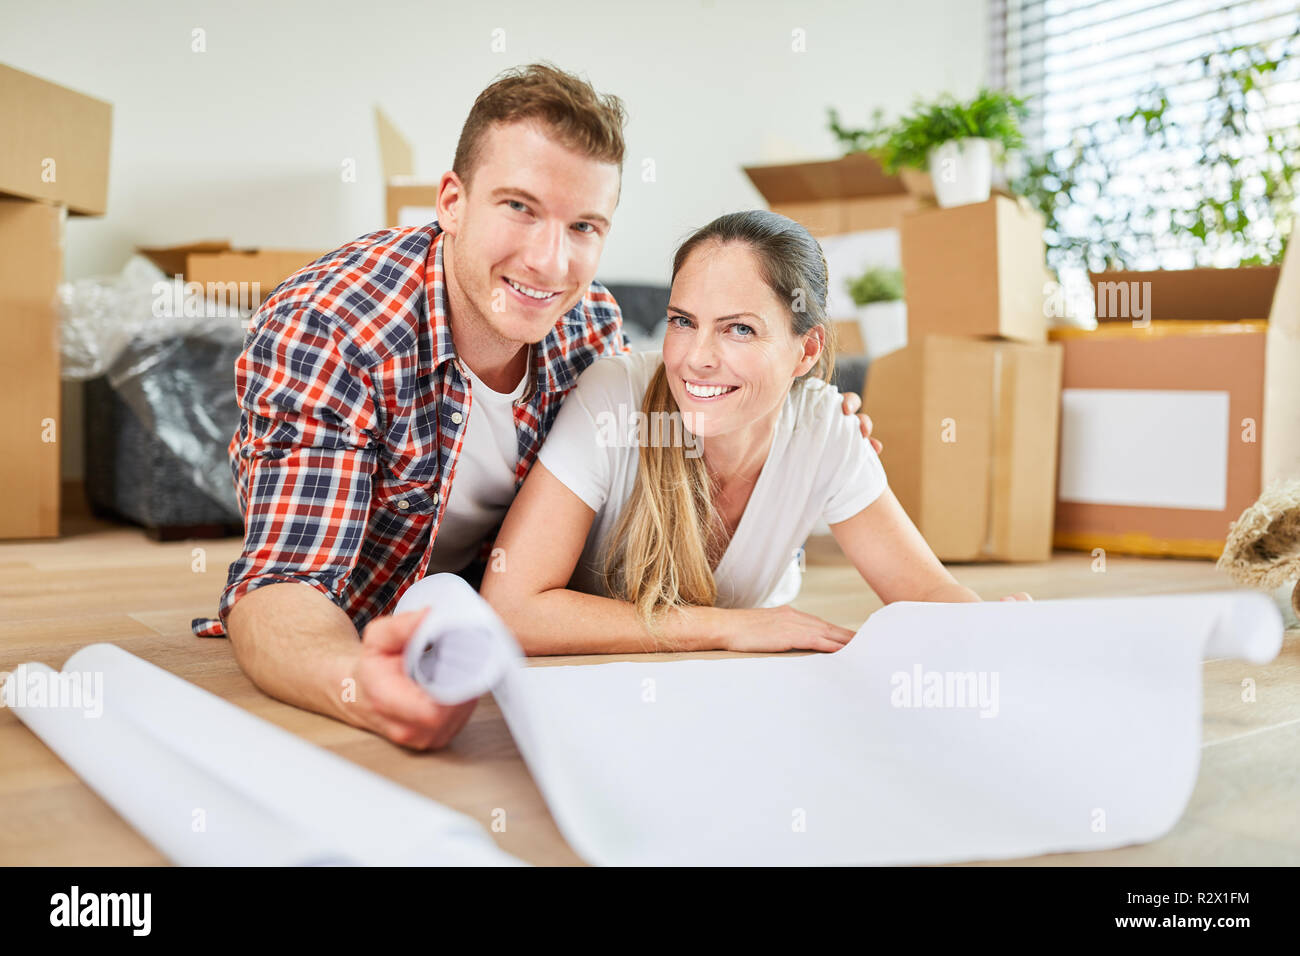 Happy young couple together plans home building or house purchase Stock Photo